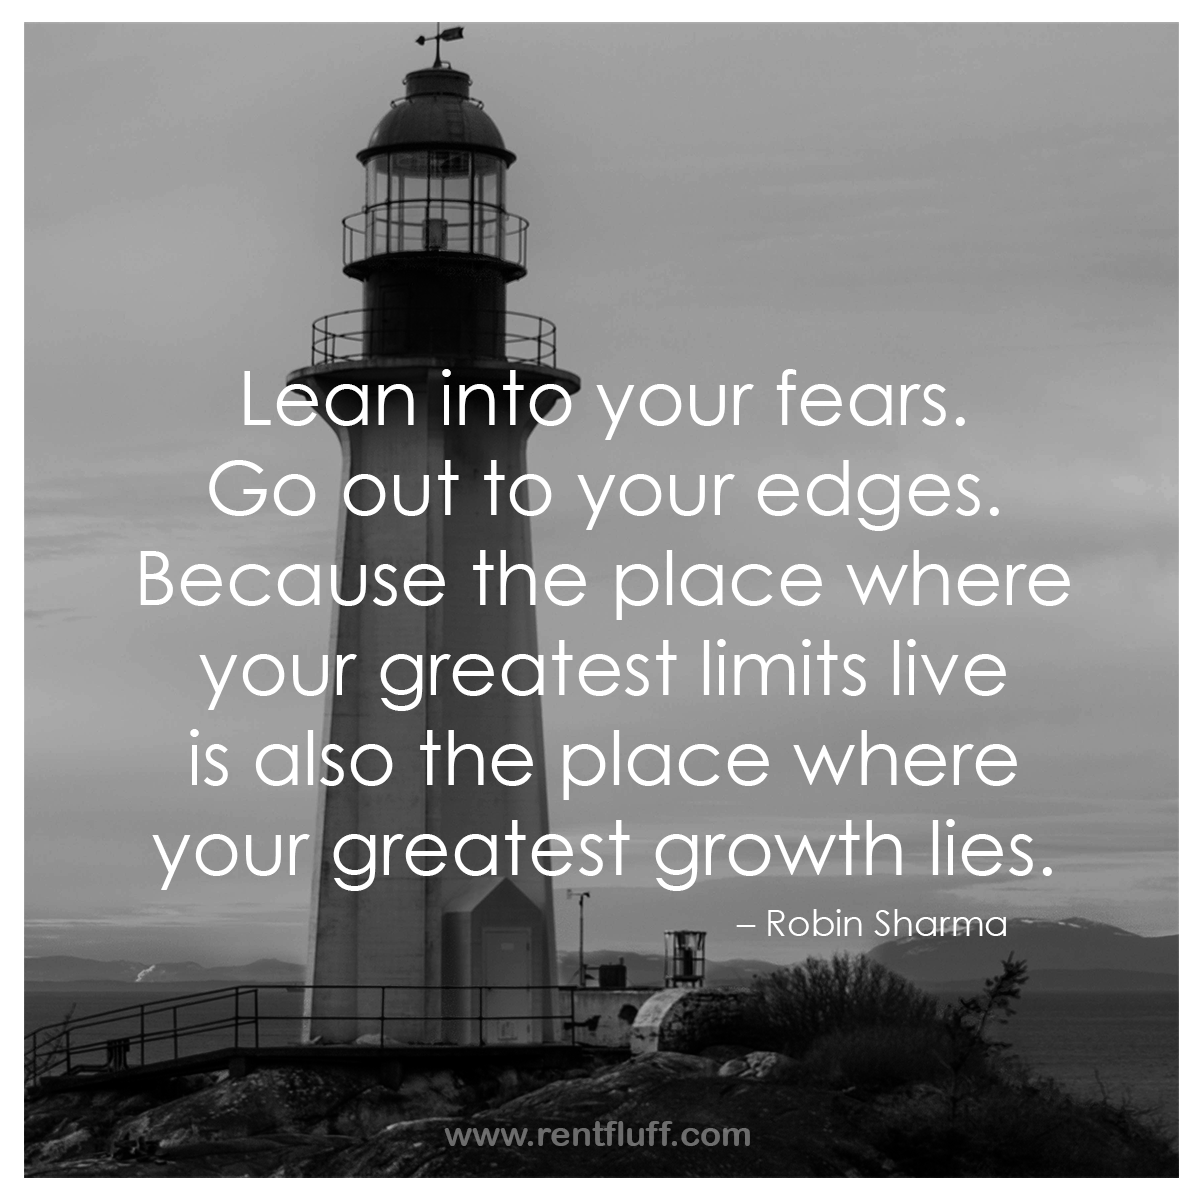 Lean into your fears. Go out to your edges. Because the place where your greatest limits live is also the place where your greatest growth lies. - Robin Sharma 